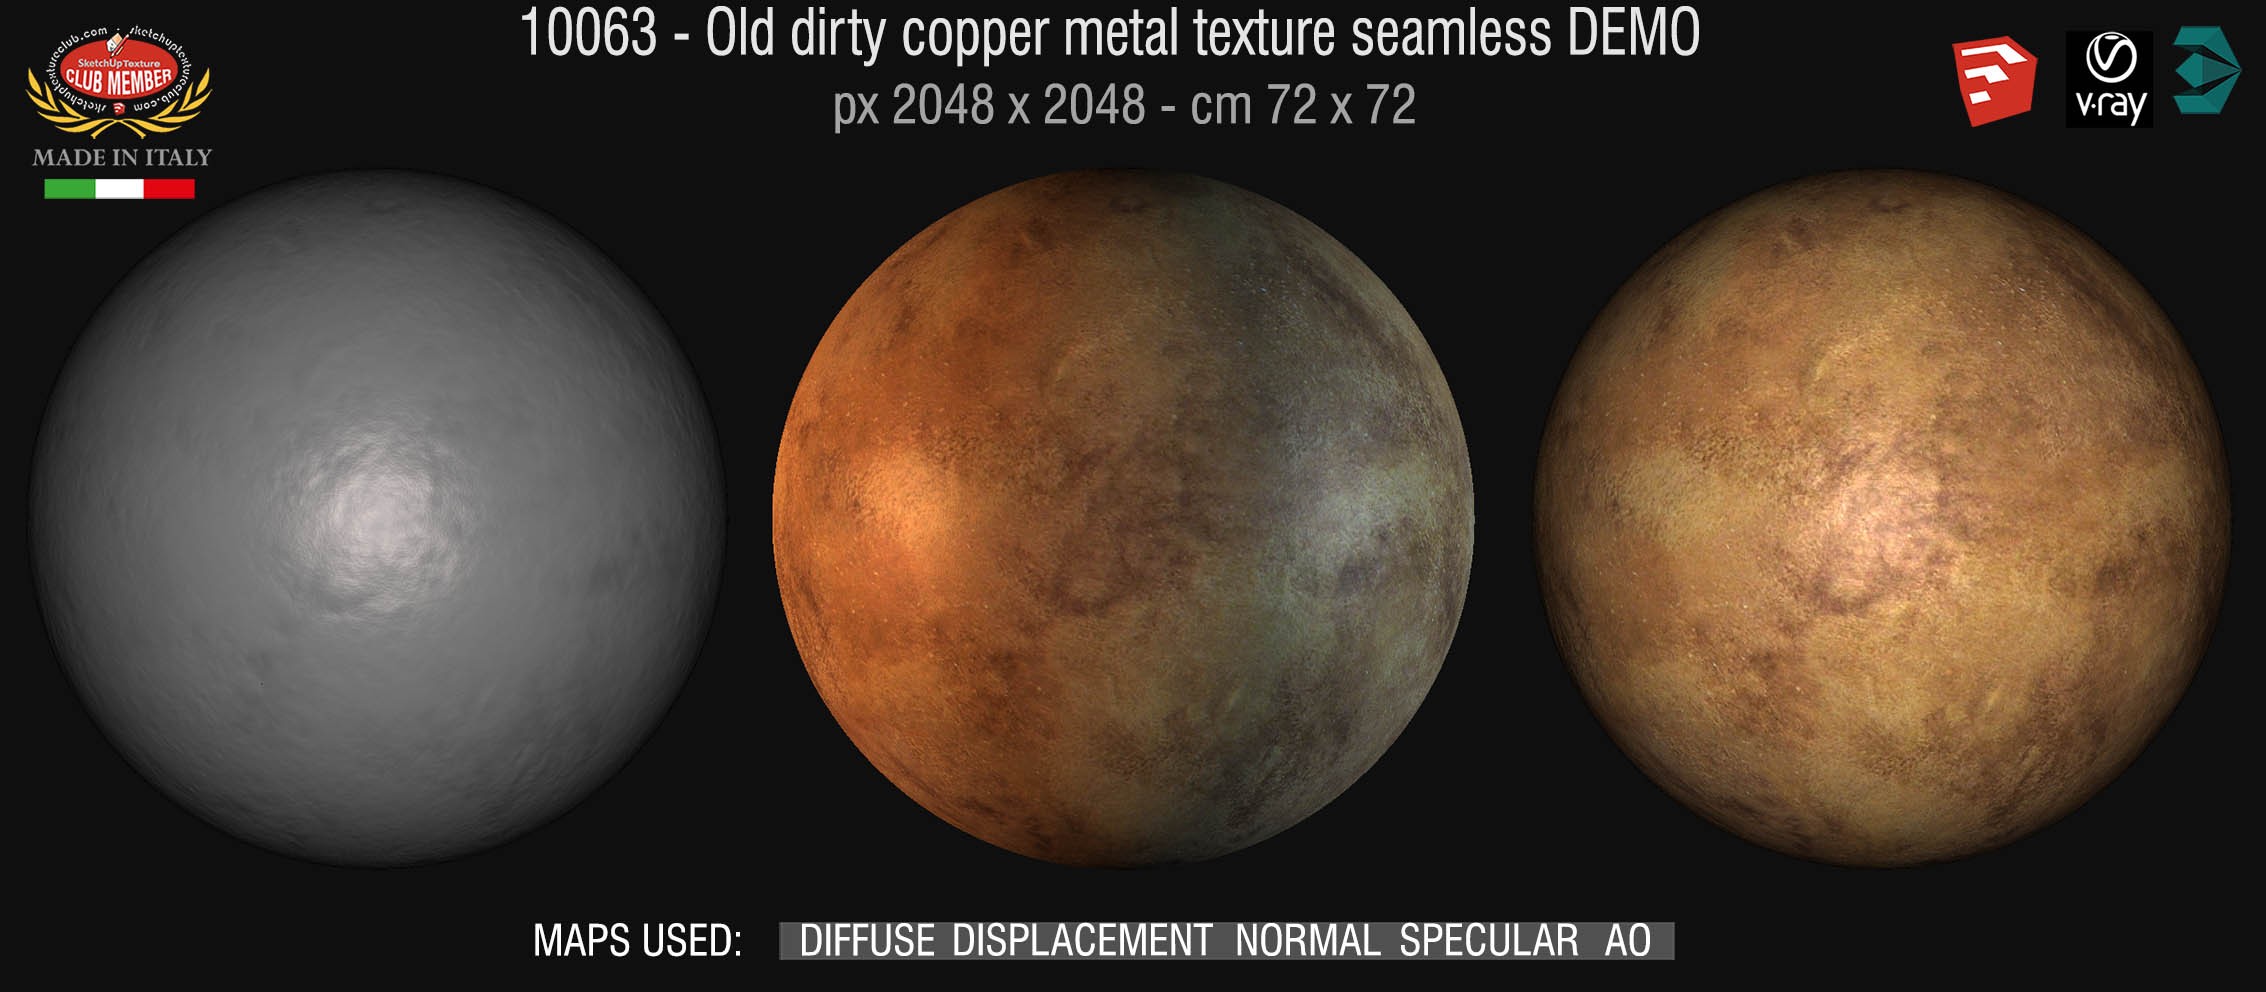 10063 HR Old dirty copper metal texture seamless + maps DEMO